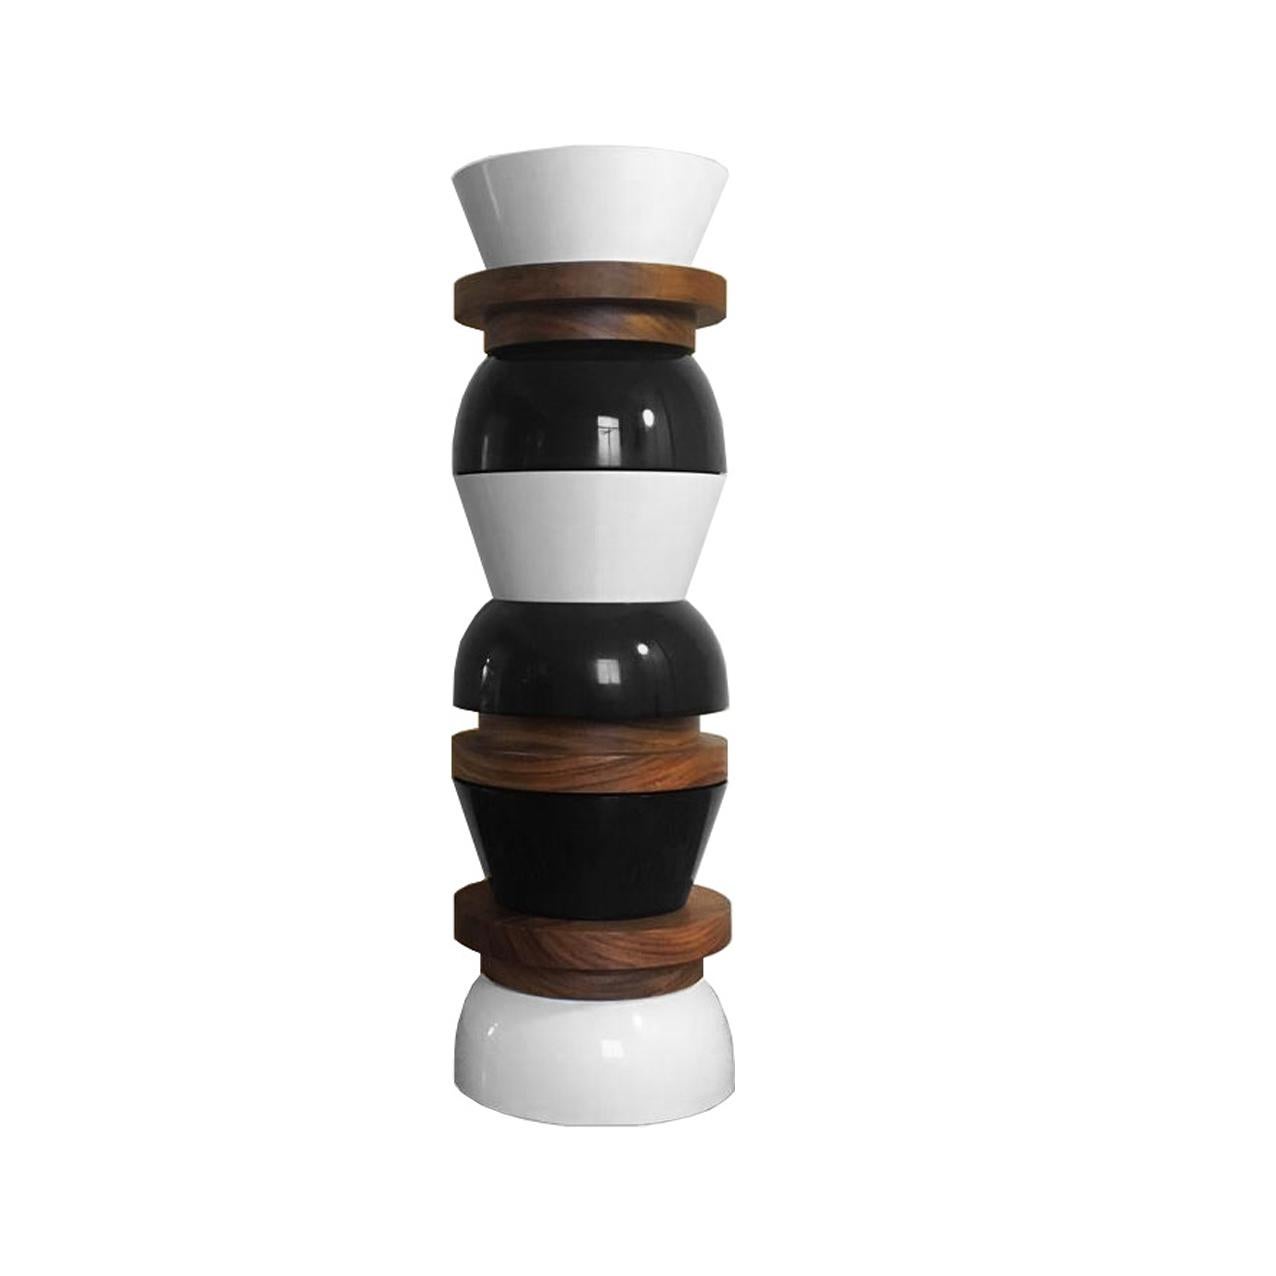 Hand-Crafted 4 TAO Stools (Minimalist, Contemporary, Wood Sculptural Object)